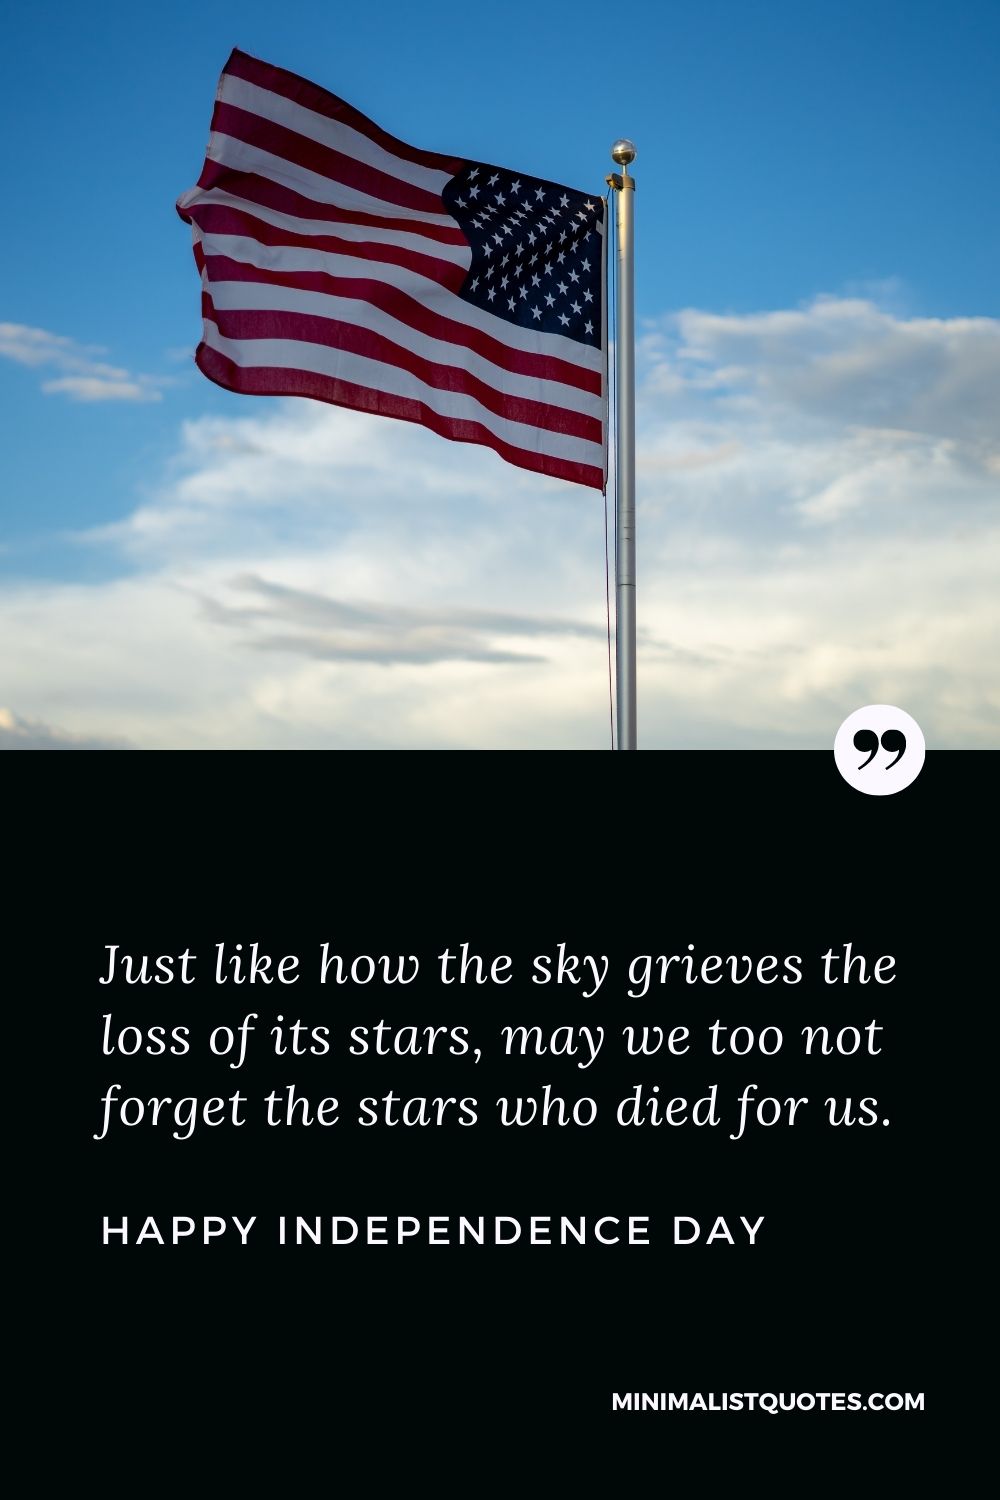 Independence Day wishes quotes with images: Just like how the sky grieves the loss of its stars, may we too not forget the stars who died for us. Happy Independence Day!